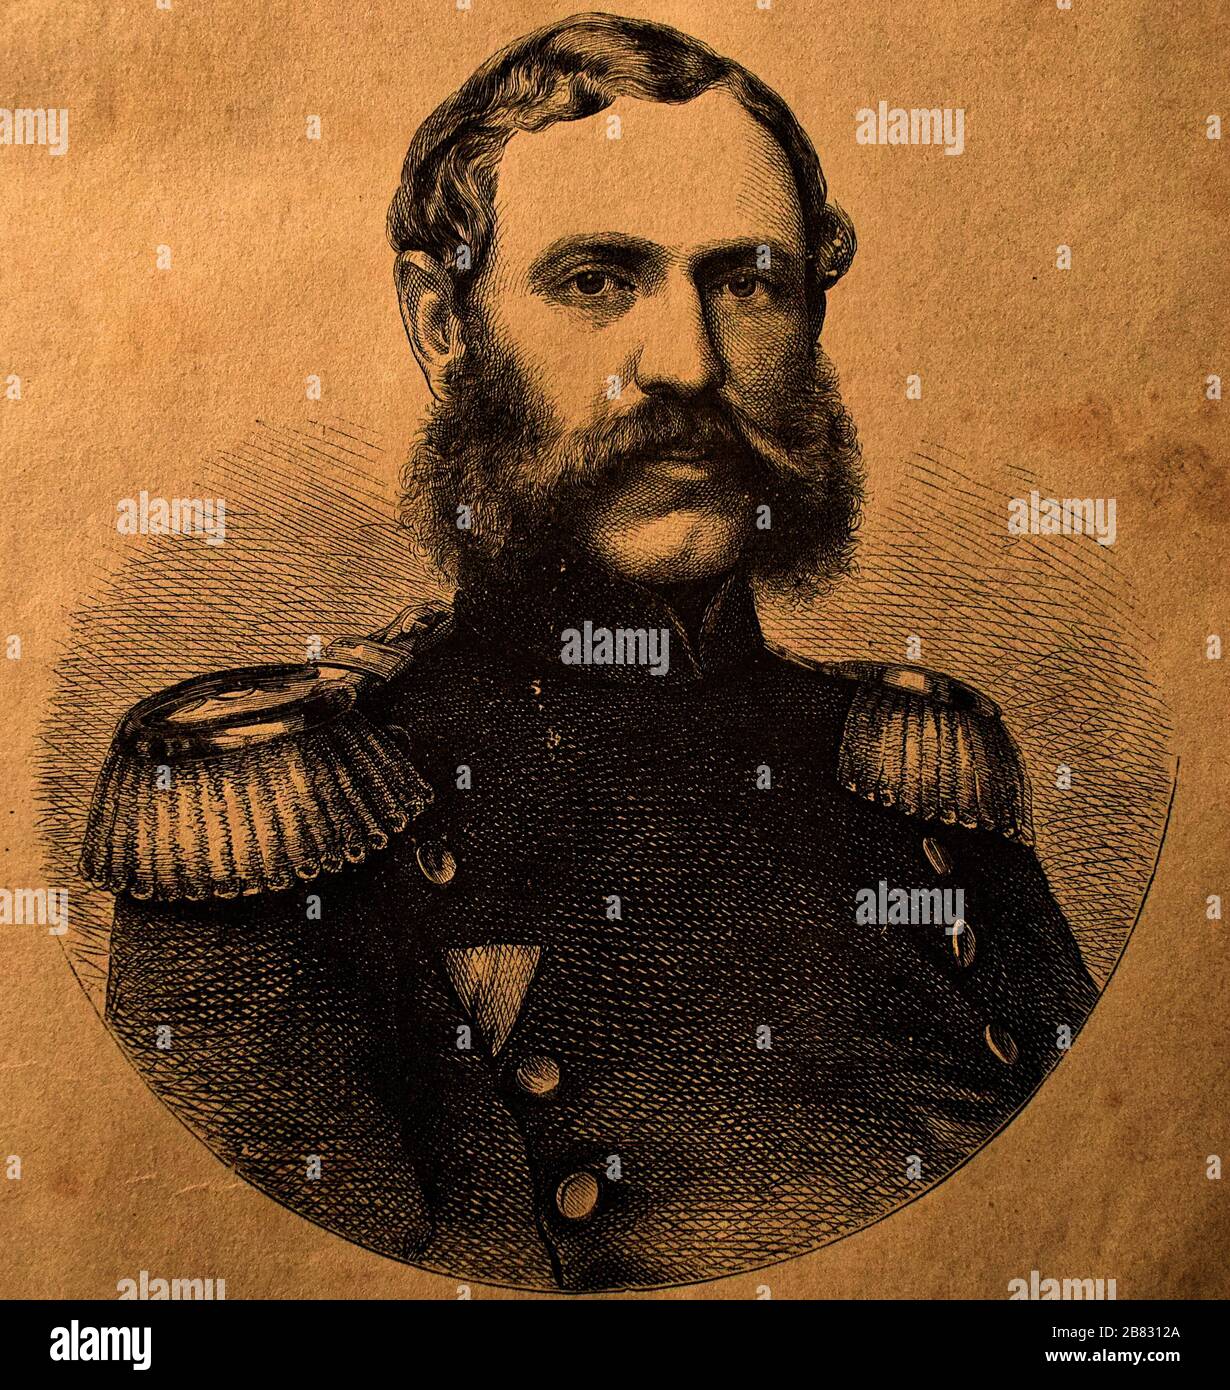 portrait of a prussian general during the war of 1870 Stock Photo